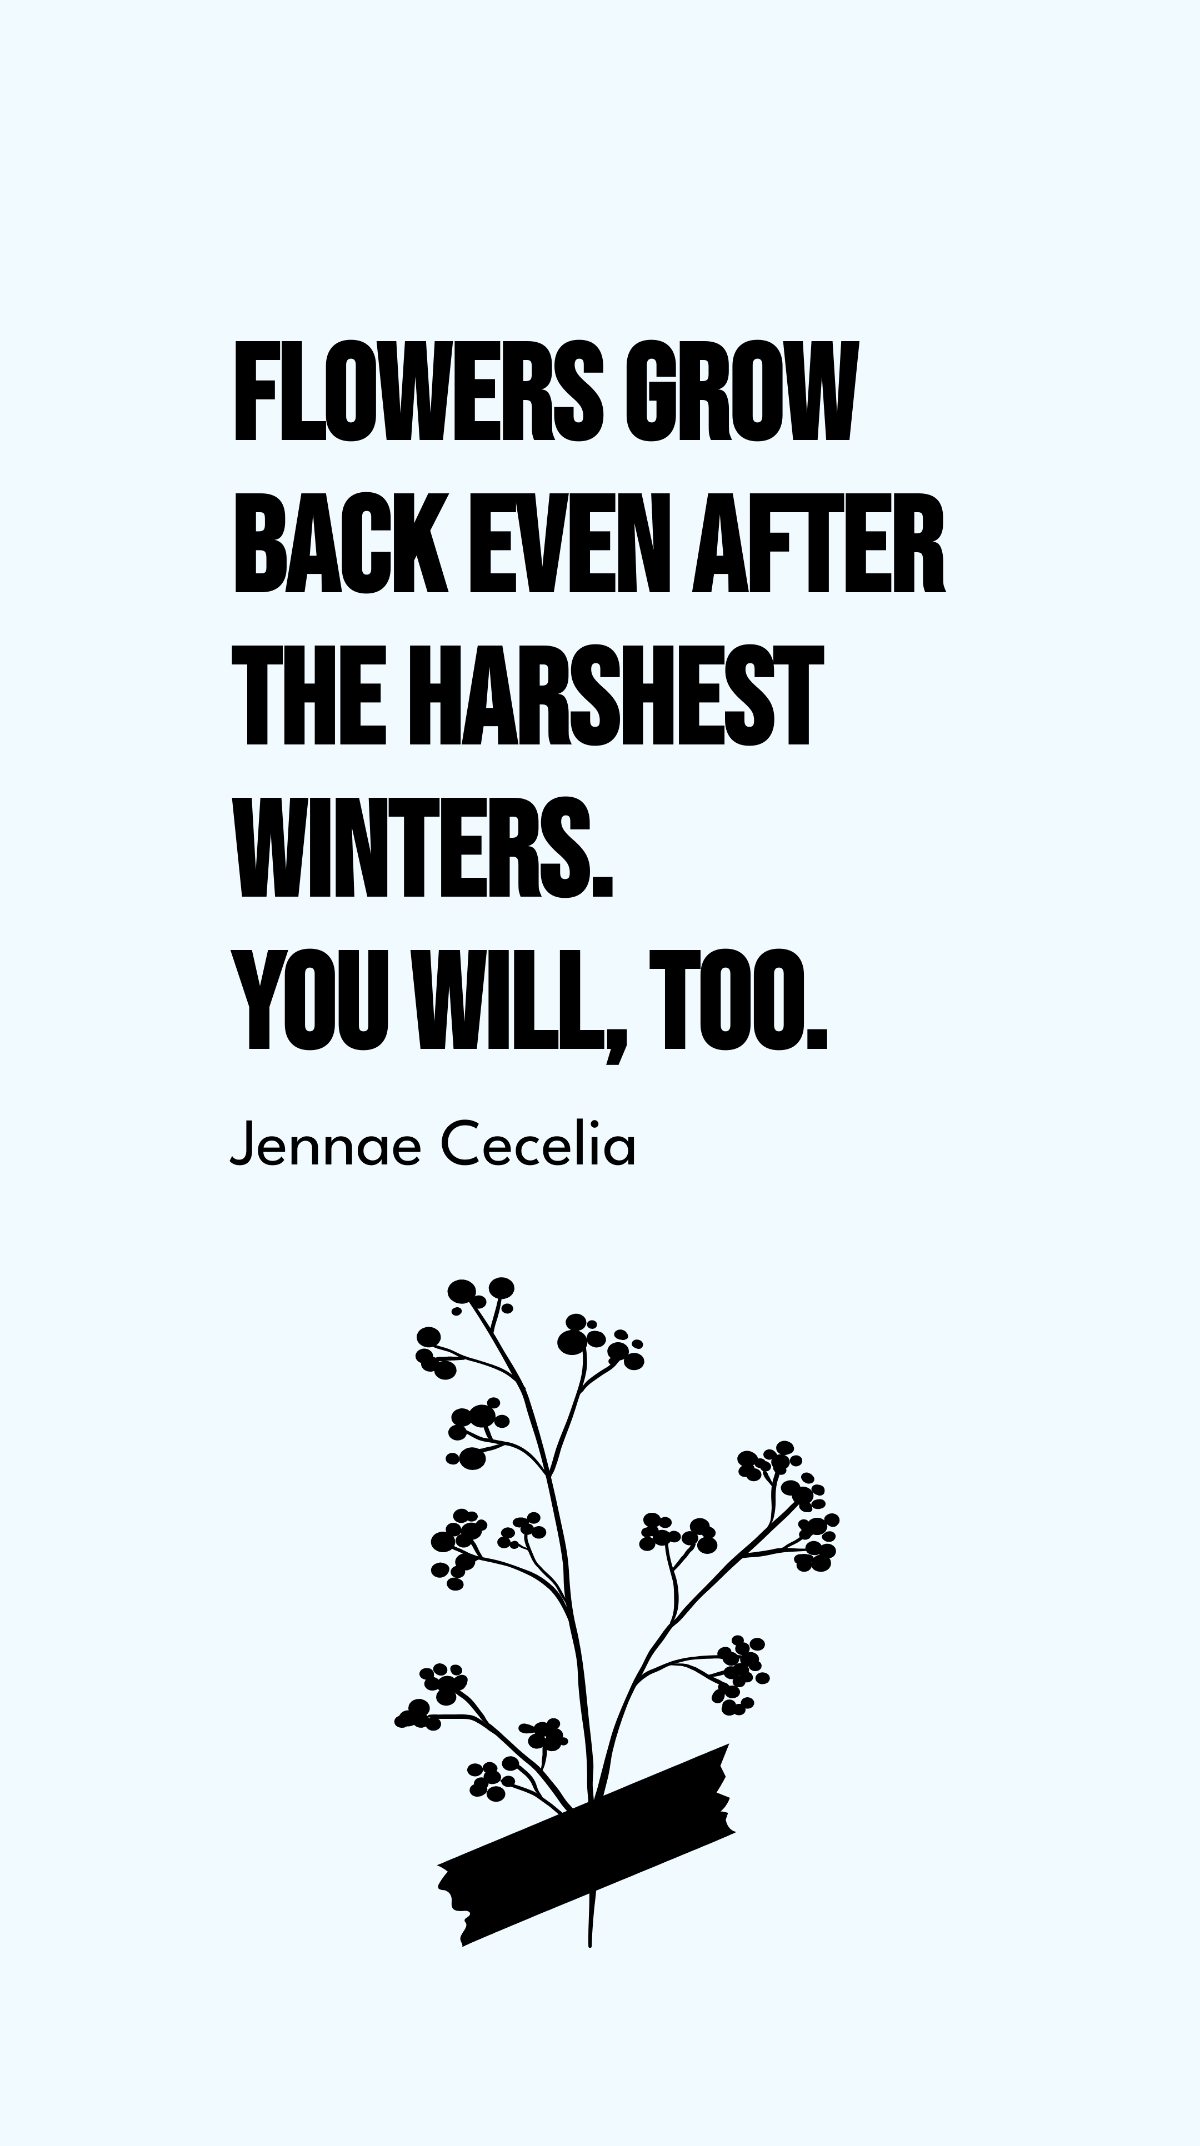 Free Jennae Cecelia - Flowers grow back even after the harshest winters. You will, too. Template